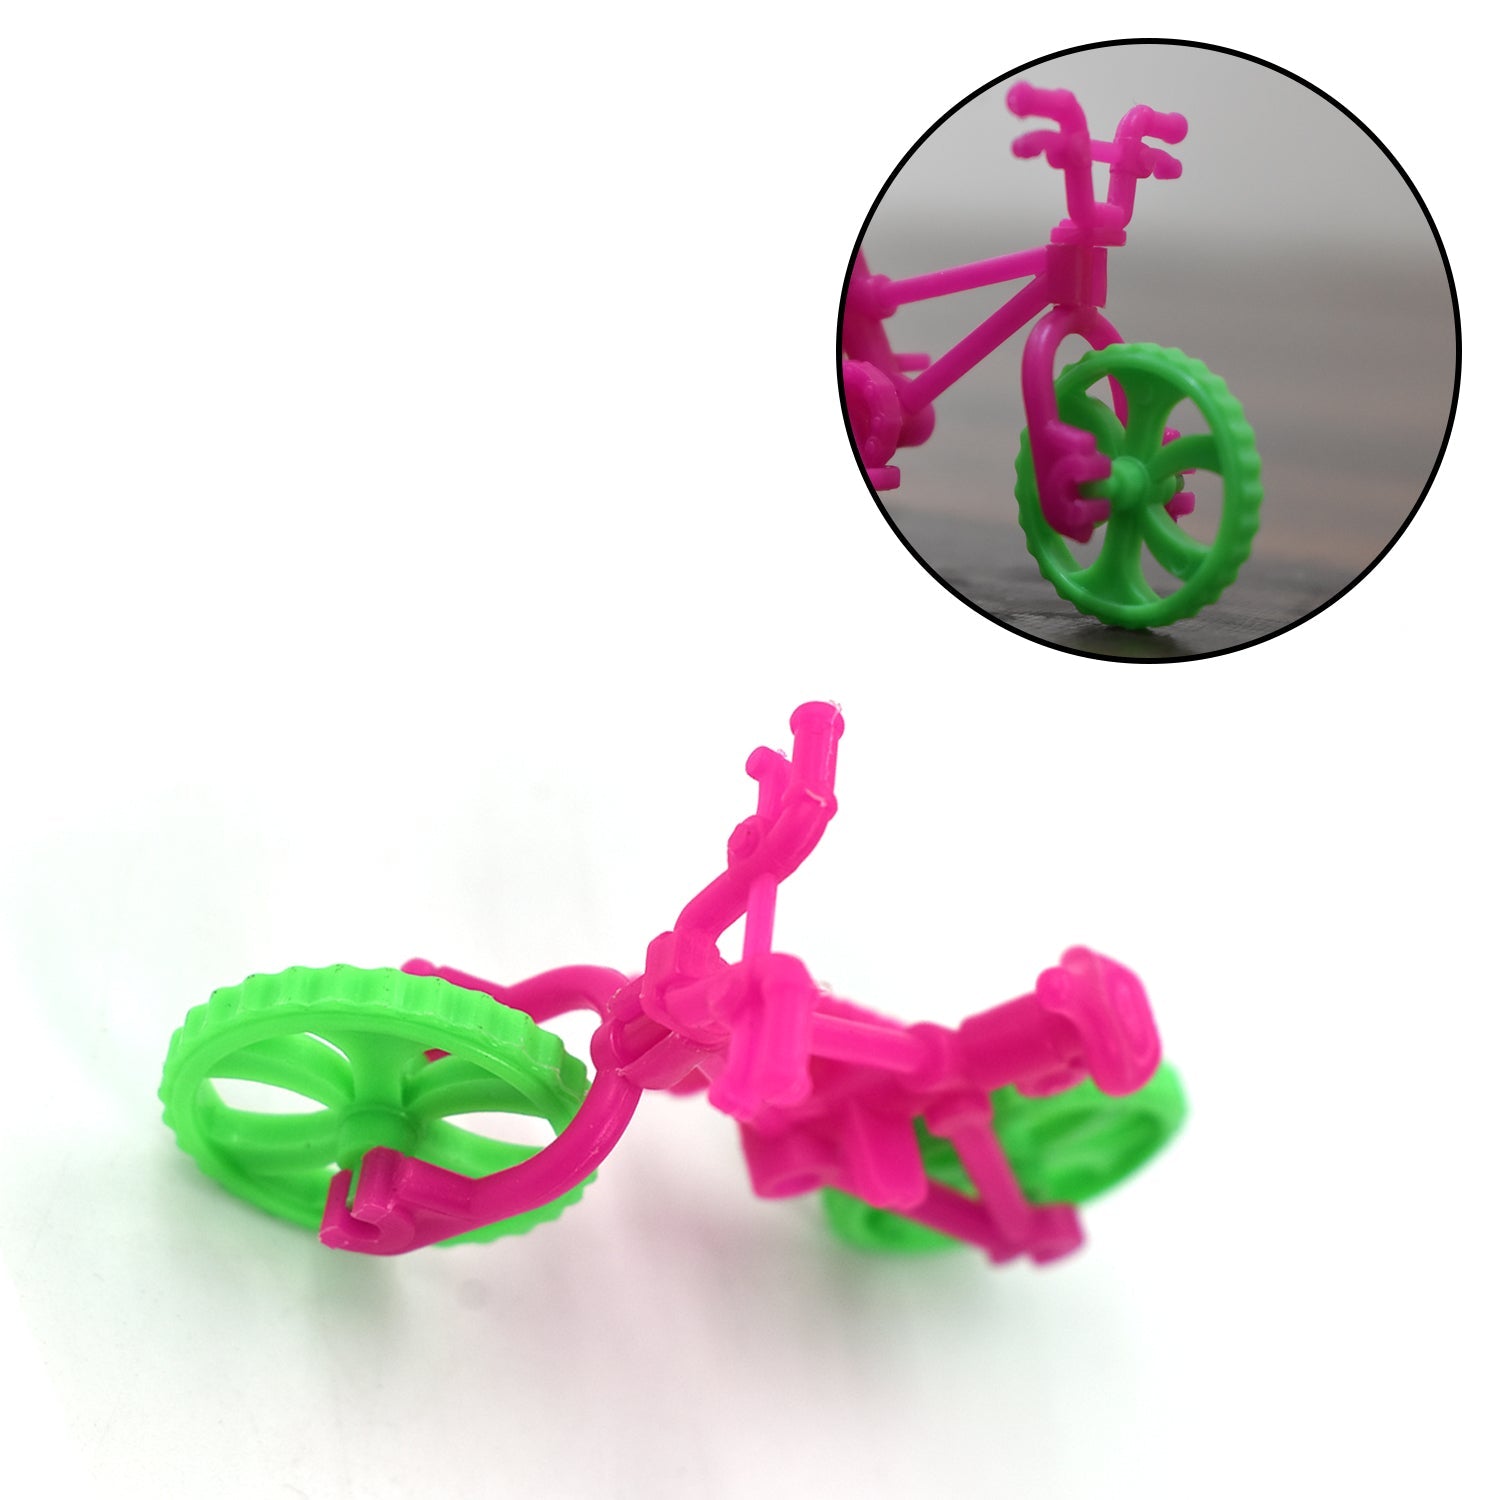 4421 30pc small bicycle toy  for kids 